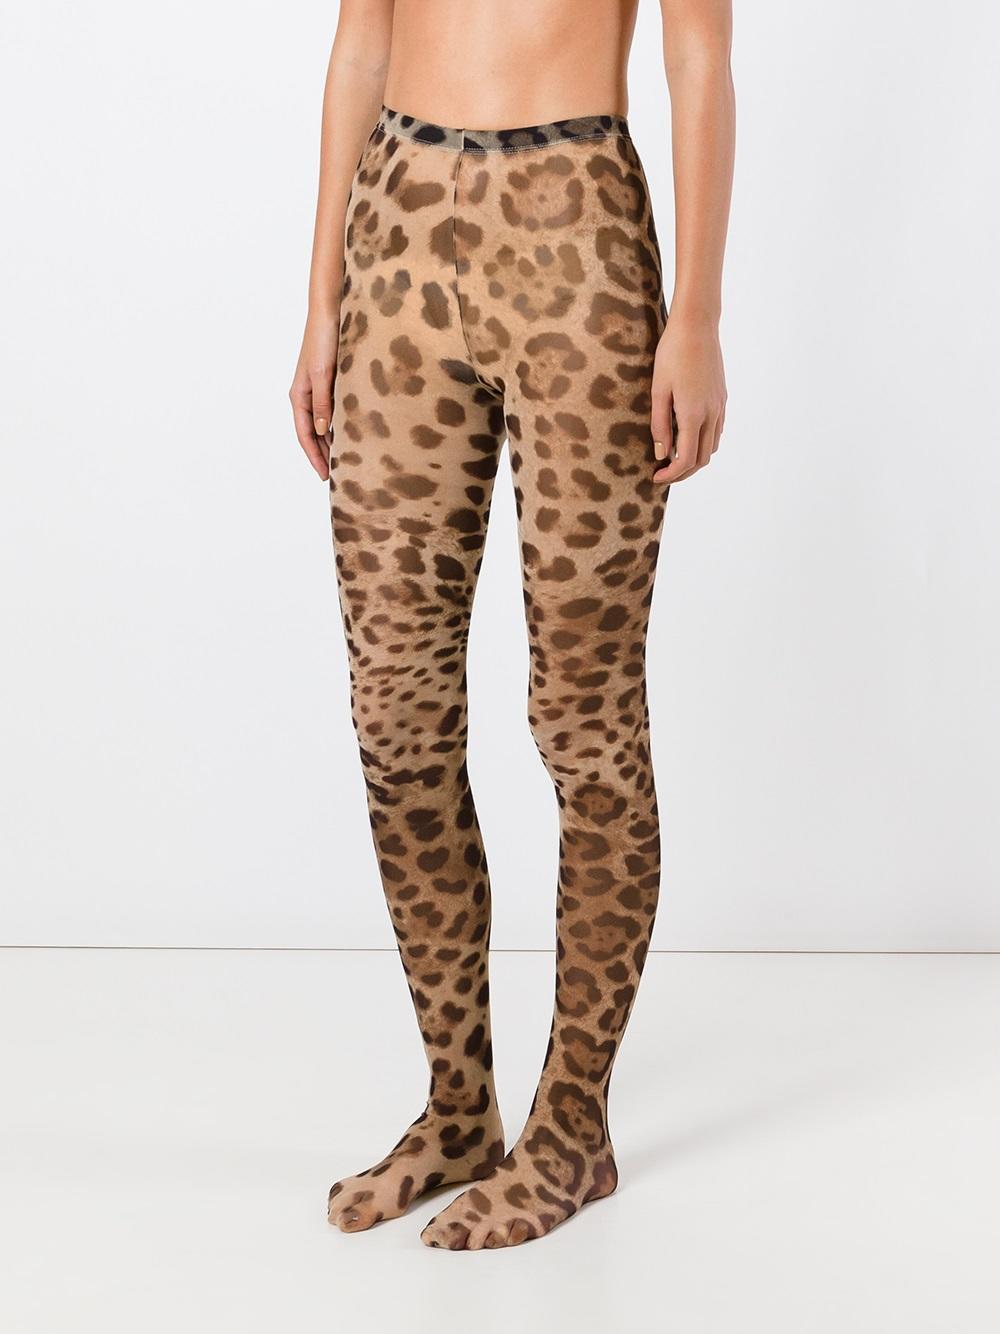 Lyst Dolce And Gabbana Leopard Print Tights In Brown 6746